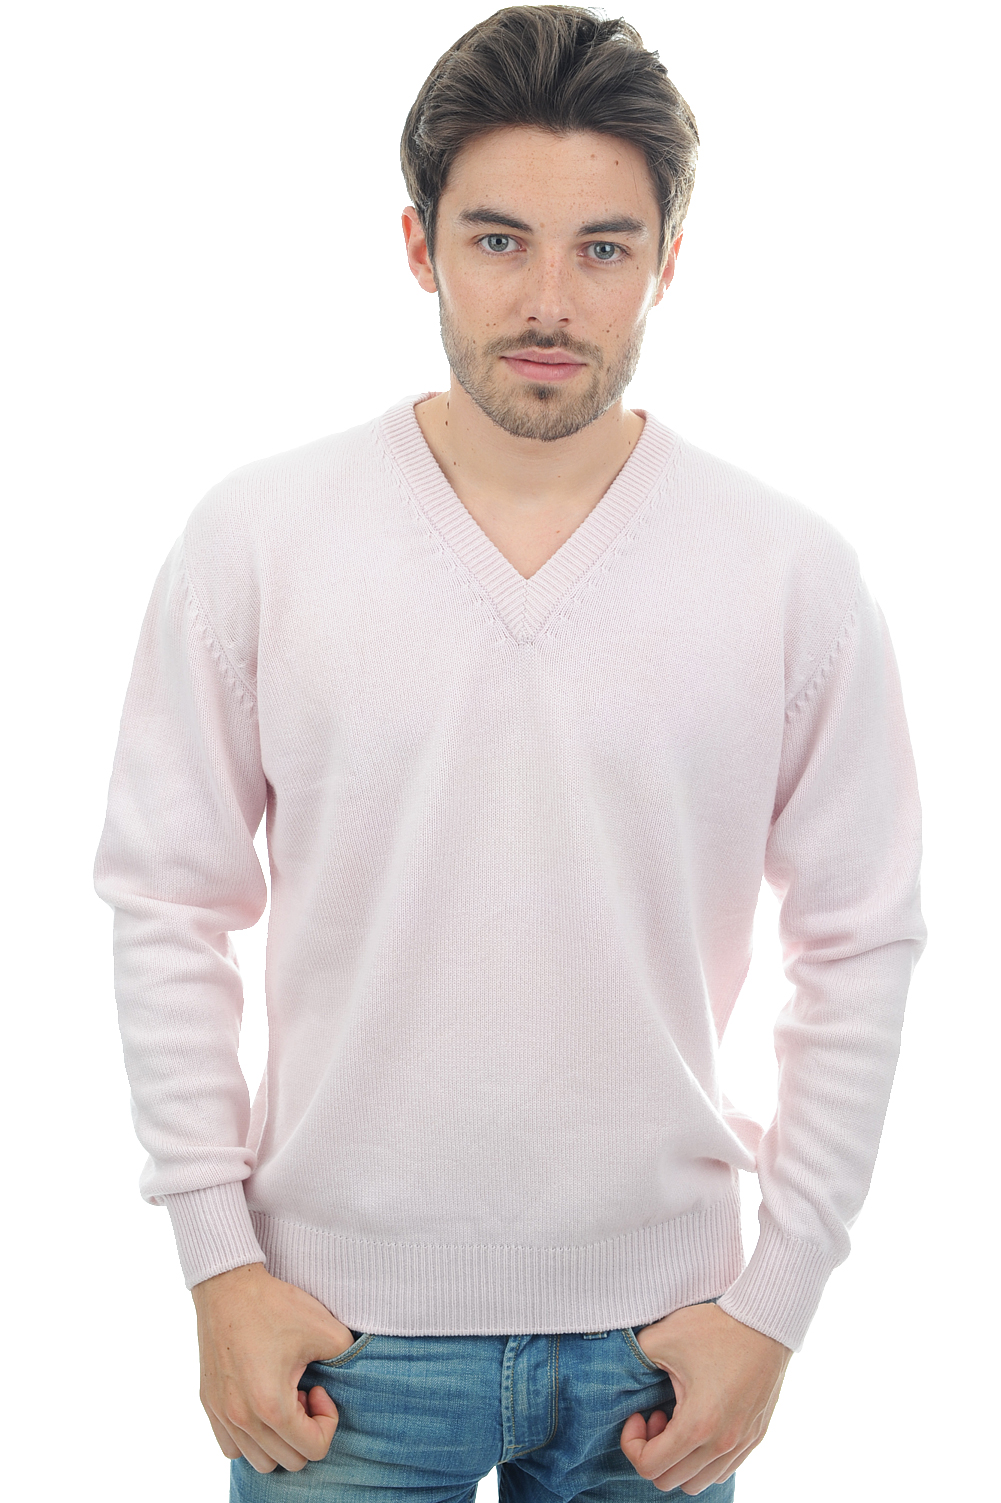 Cachemire pull homme hippolyte 4f rose pale 2xl